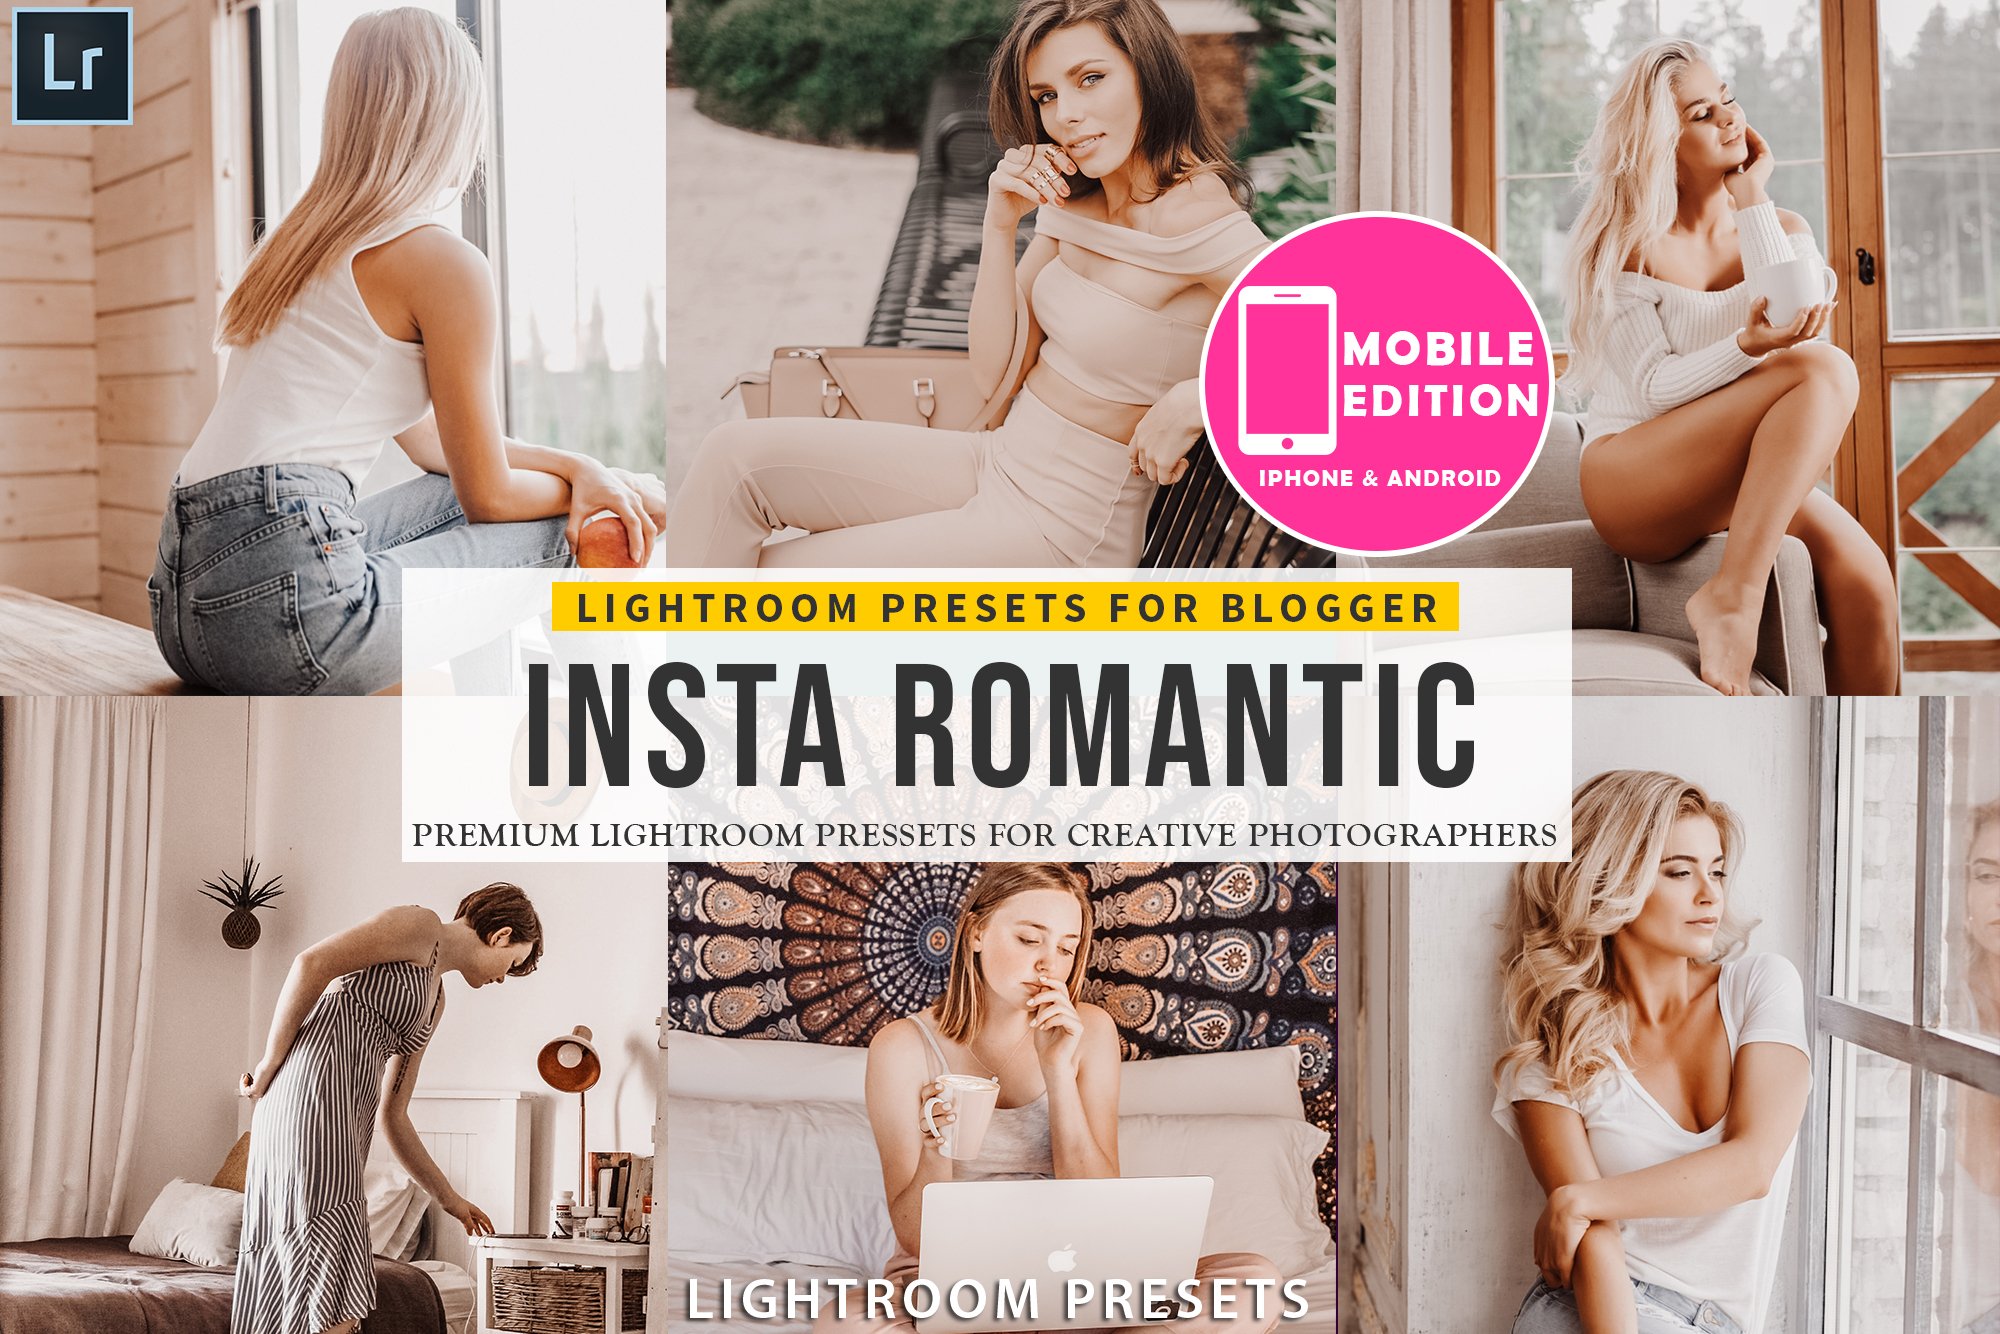 Insta romantic Mobile Lightroomcover image.